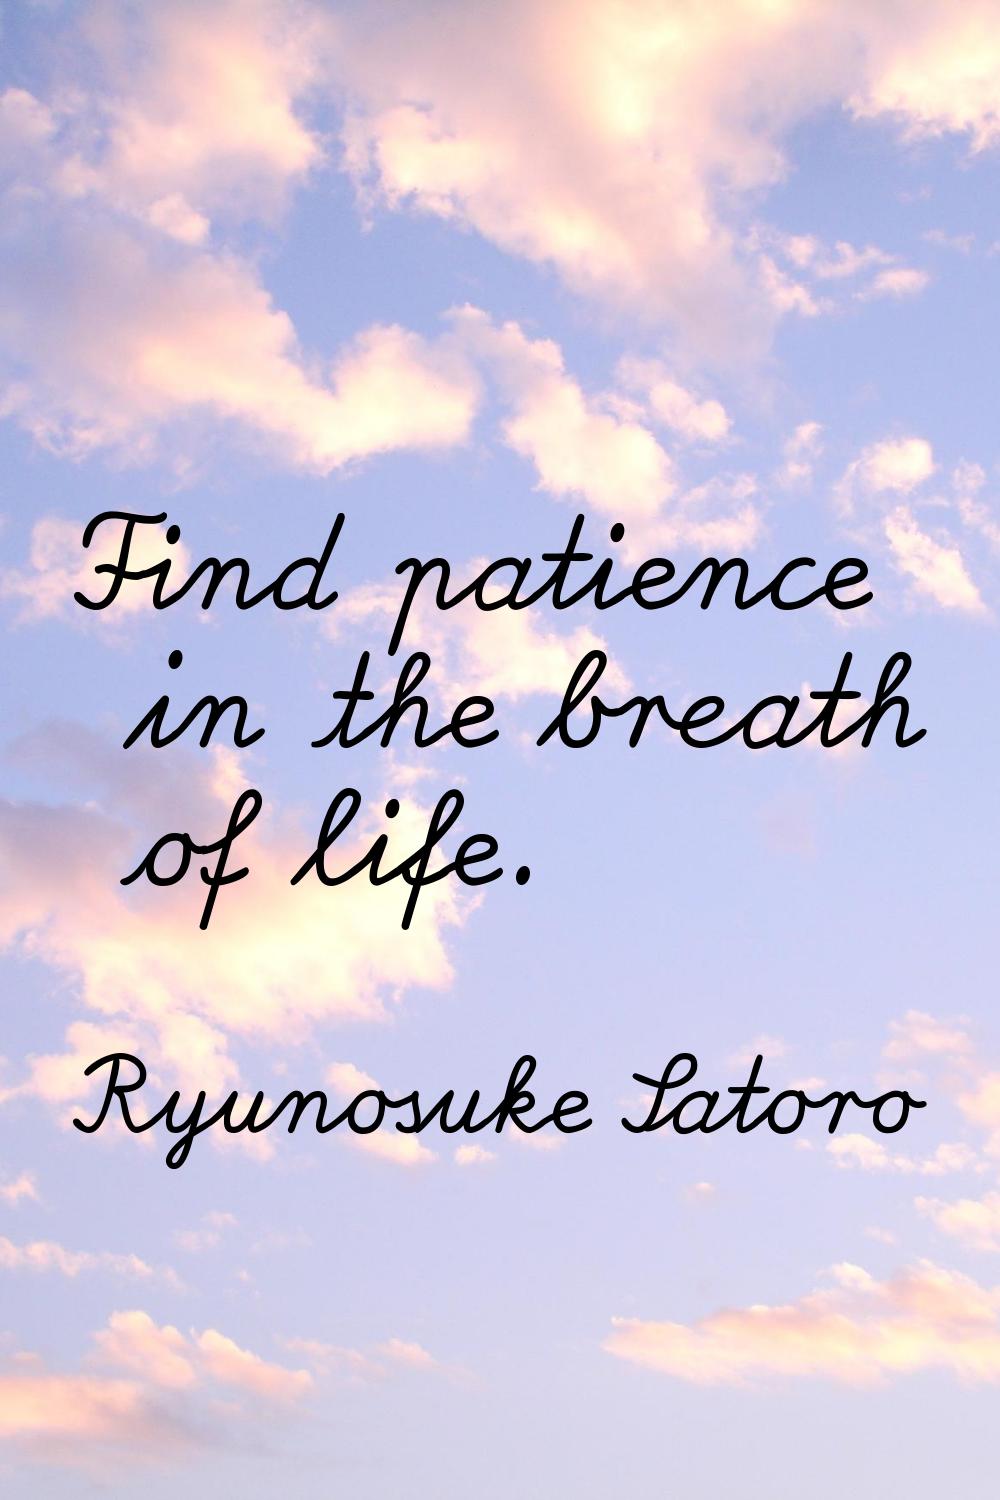 Find patience in the breath of life.